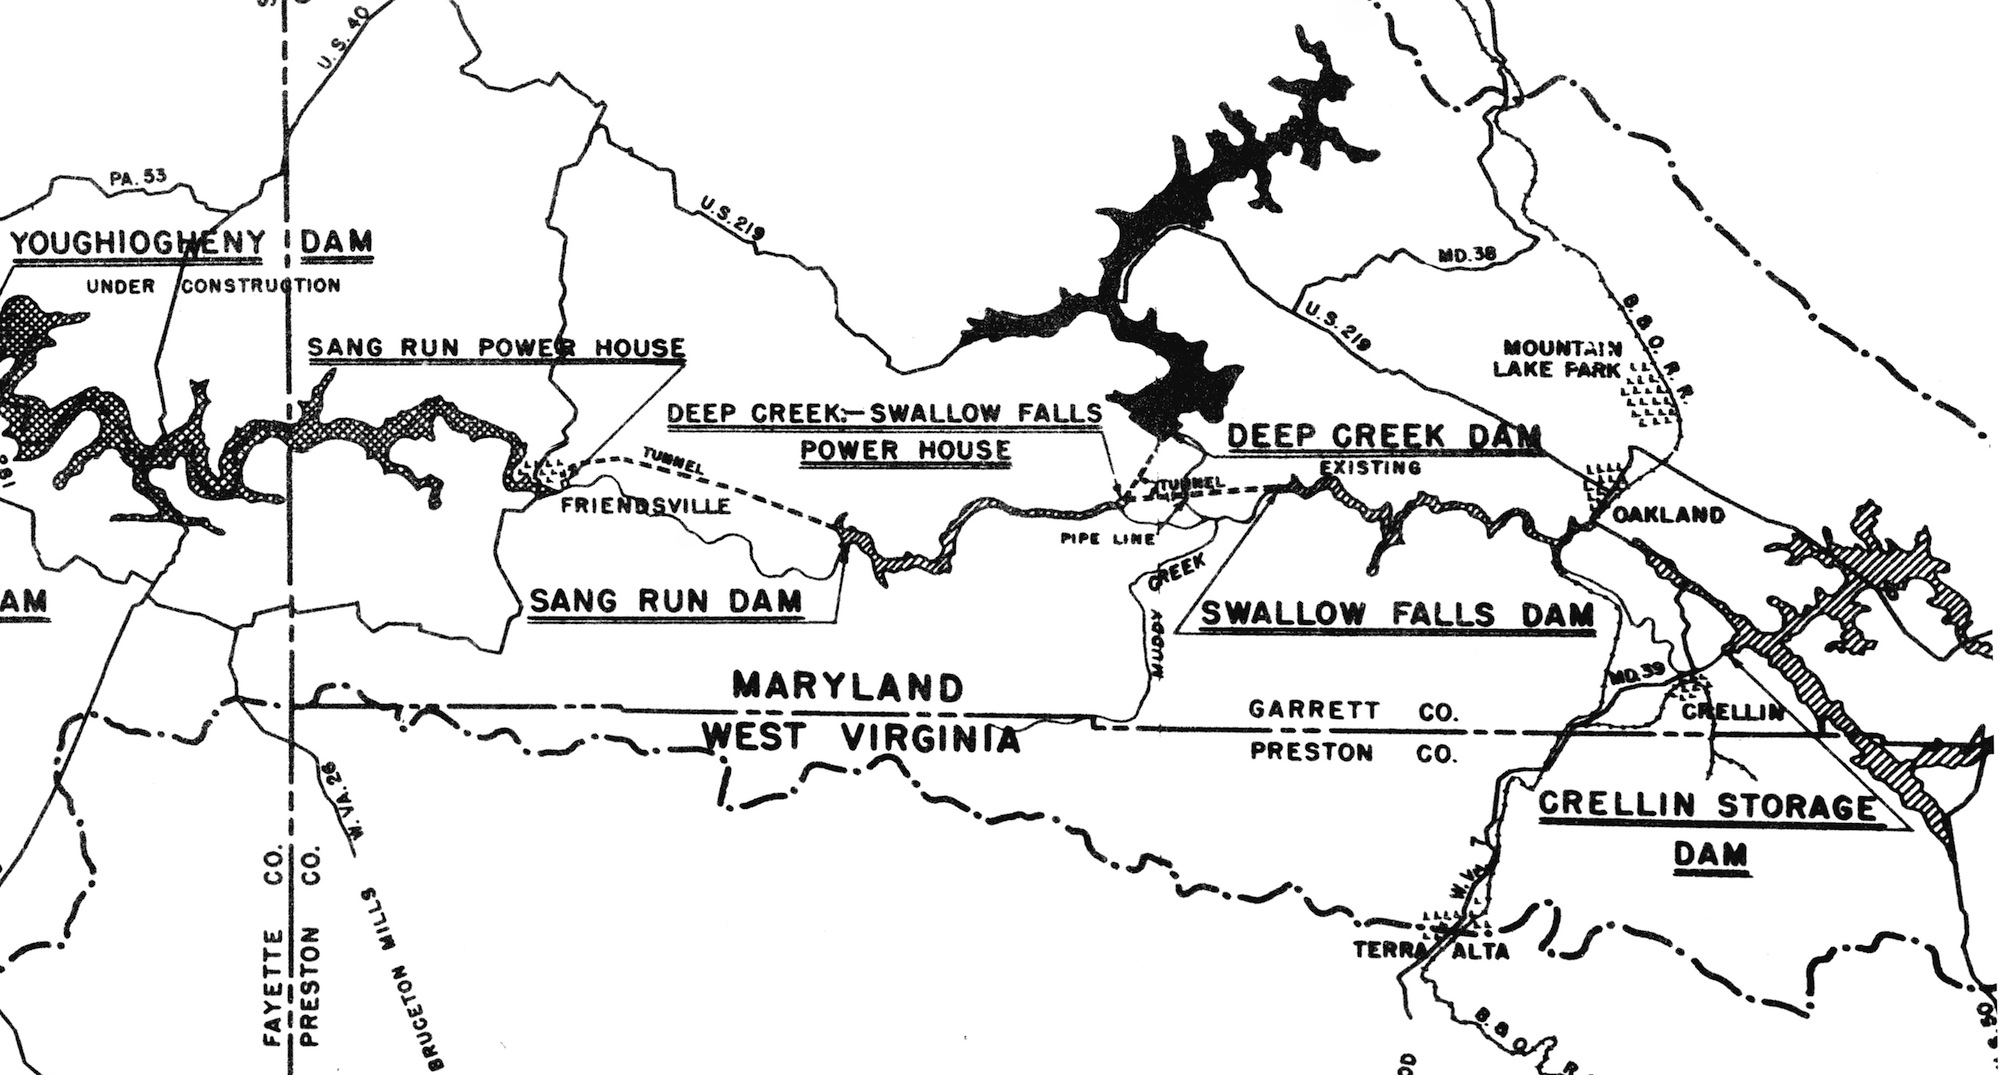 1944 House Report on the Youghiogheny Basin